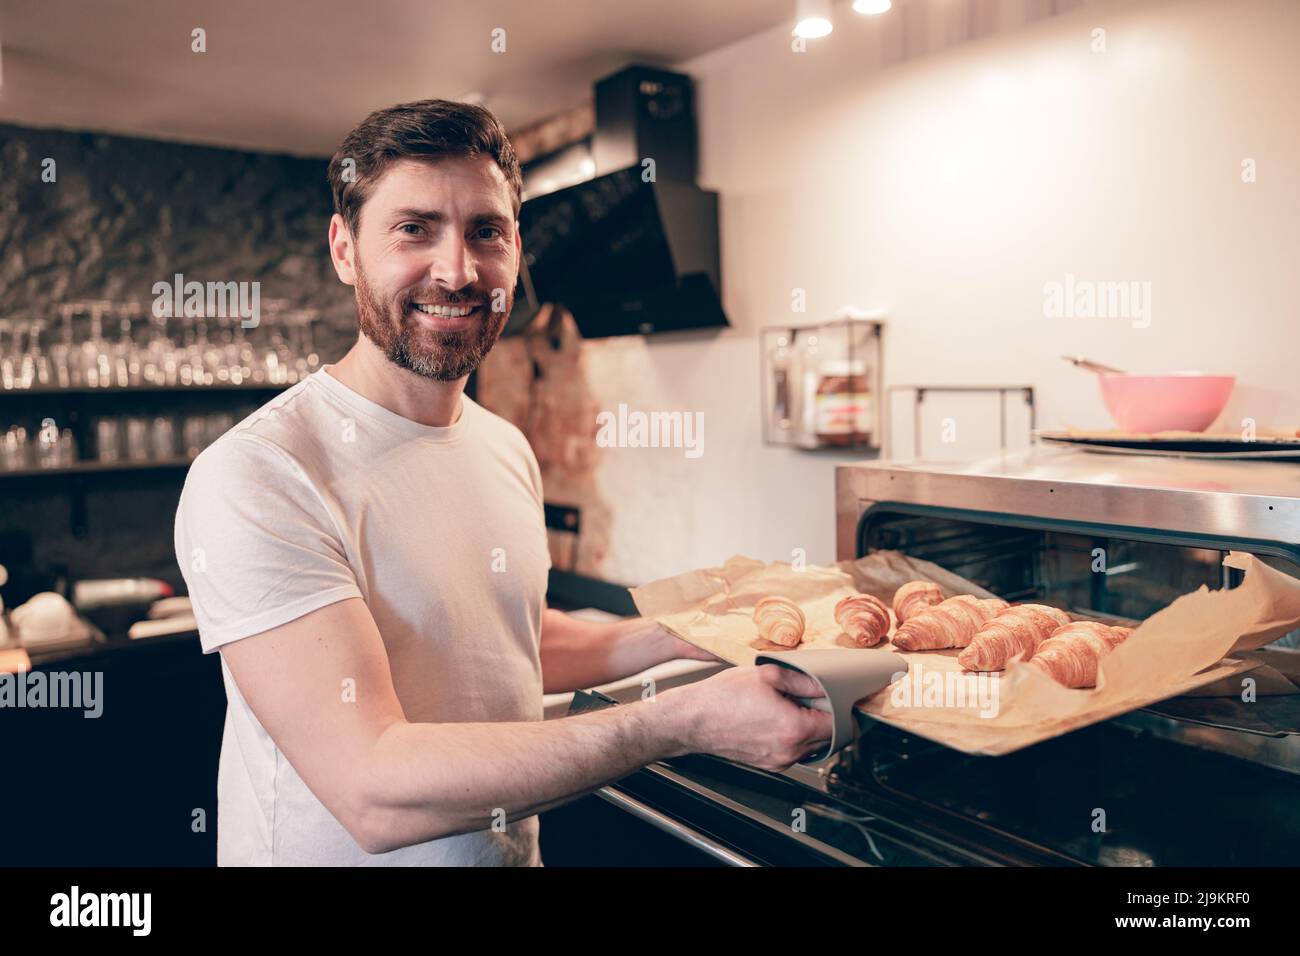 Caucasian attractive male baker taking out croissants out of oven and smiling. Bakery kitchen. Stock Photo